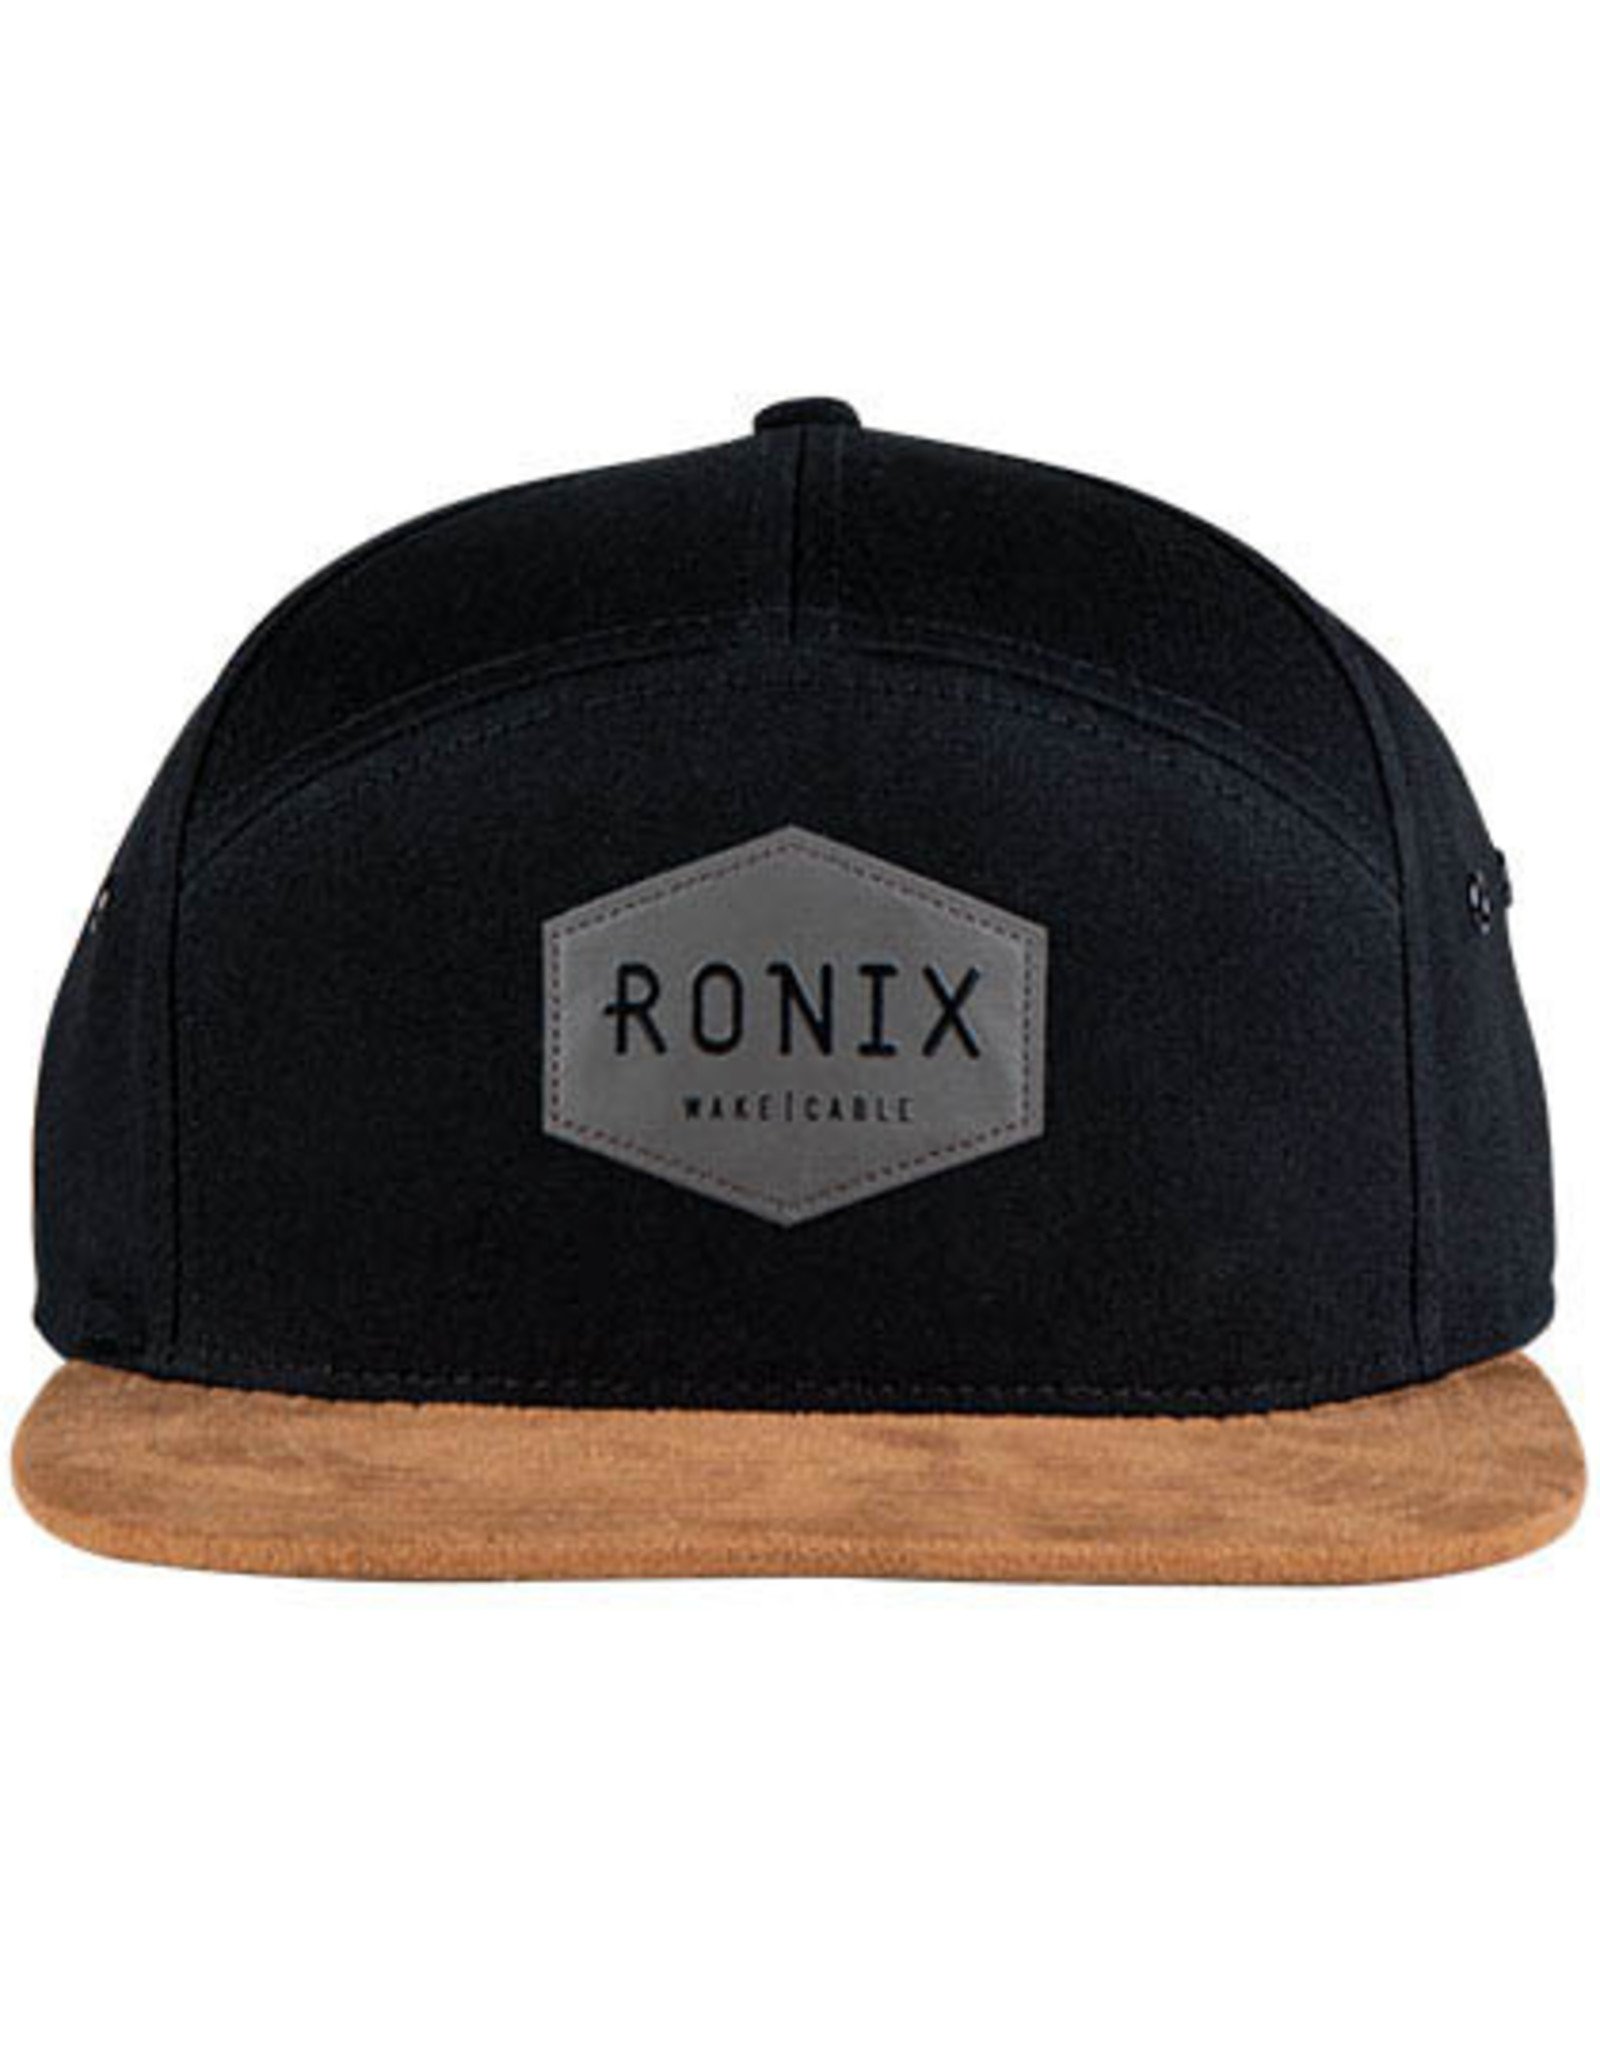 Ronix Forester Snap Back Hat -0 Black/Tan